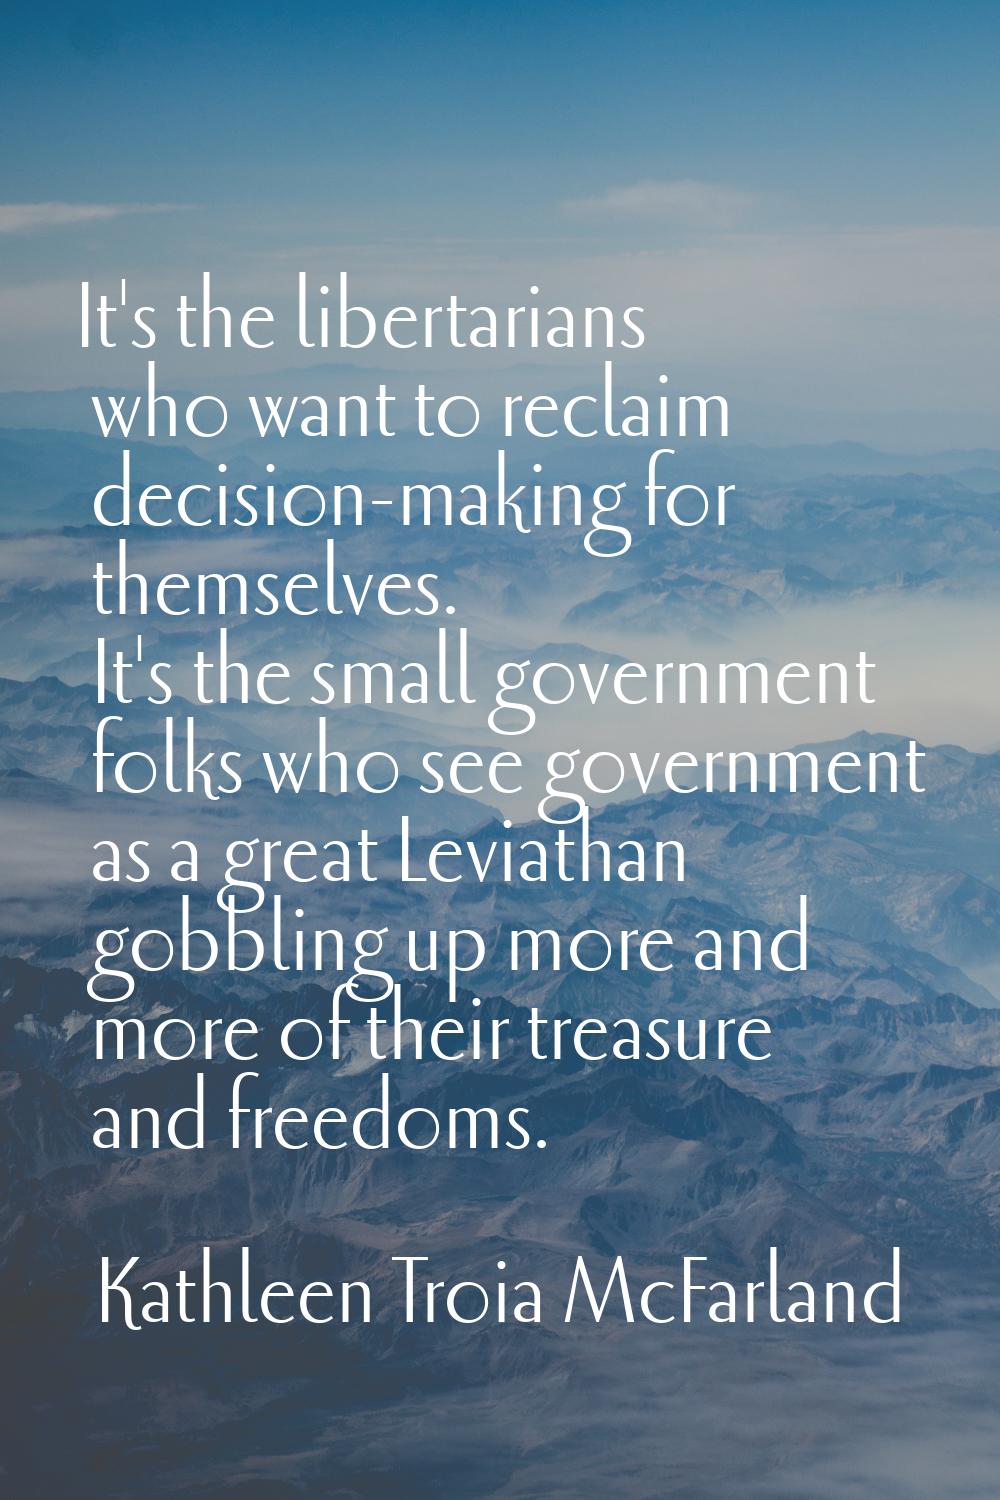 It's the libertarians who want to reclaim decision-making for themselves. It's the small government